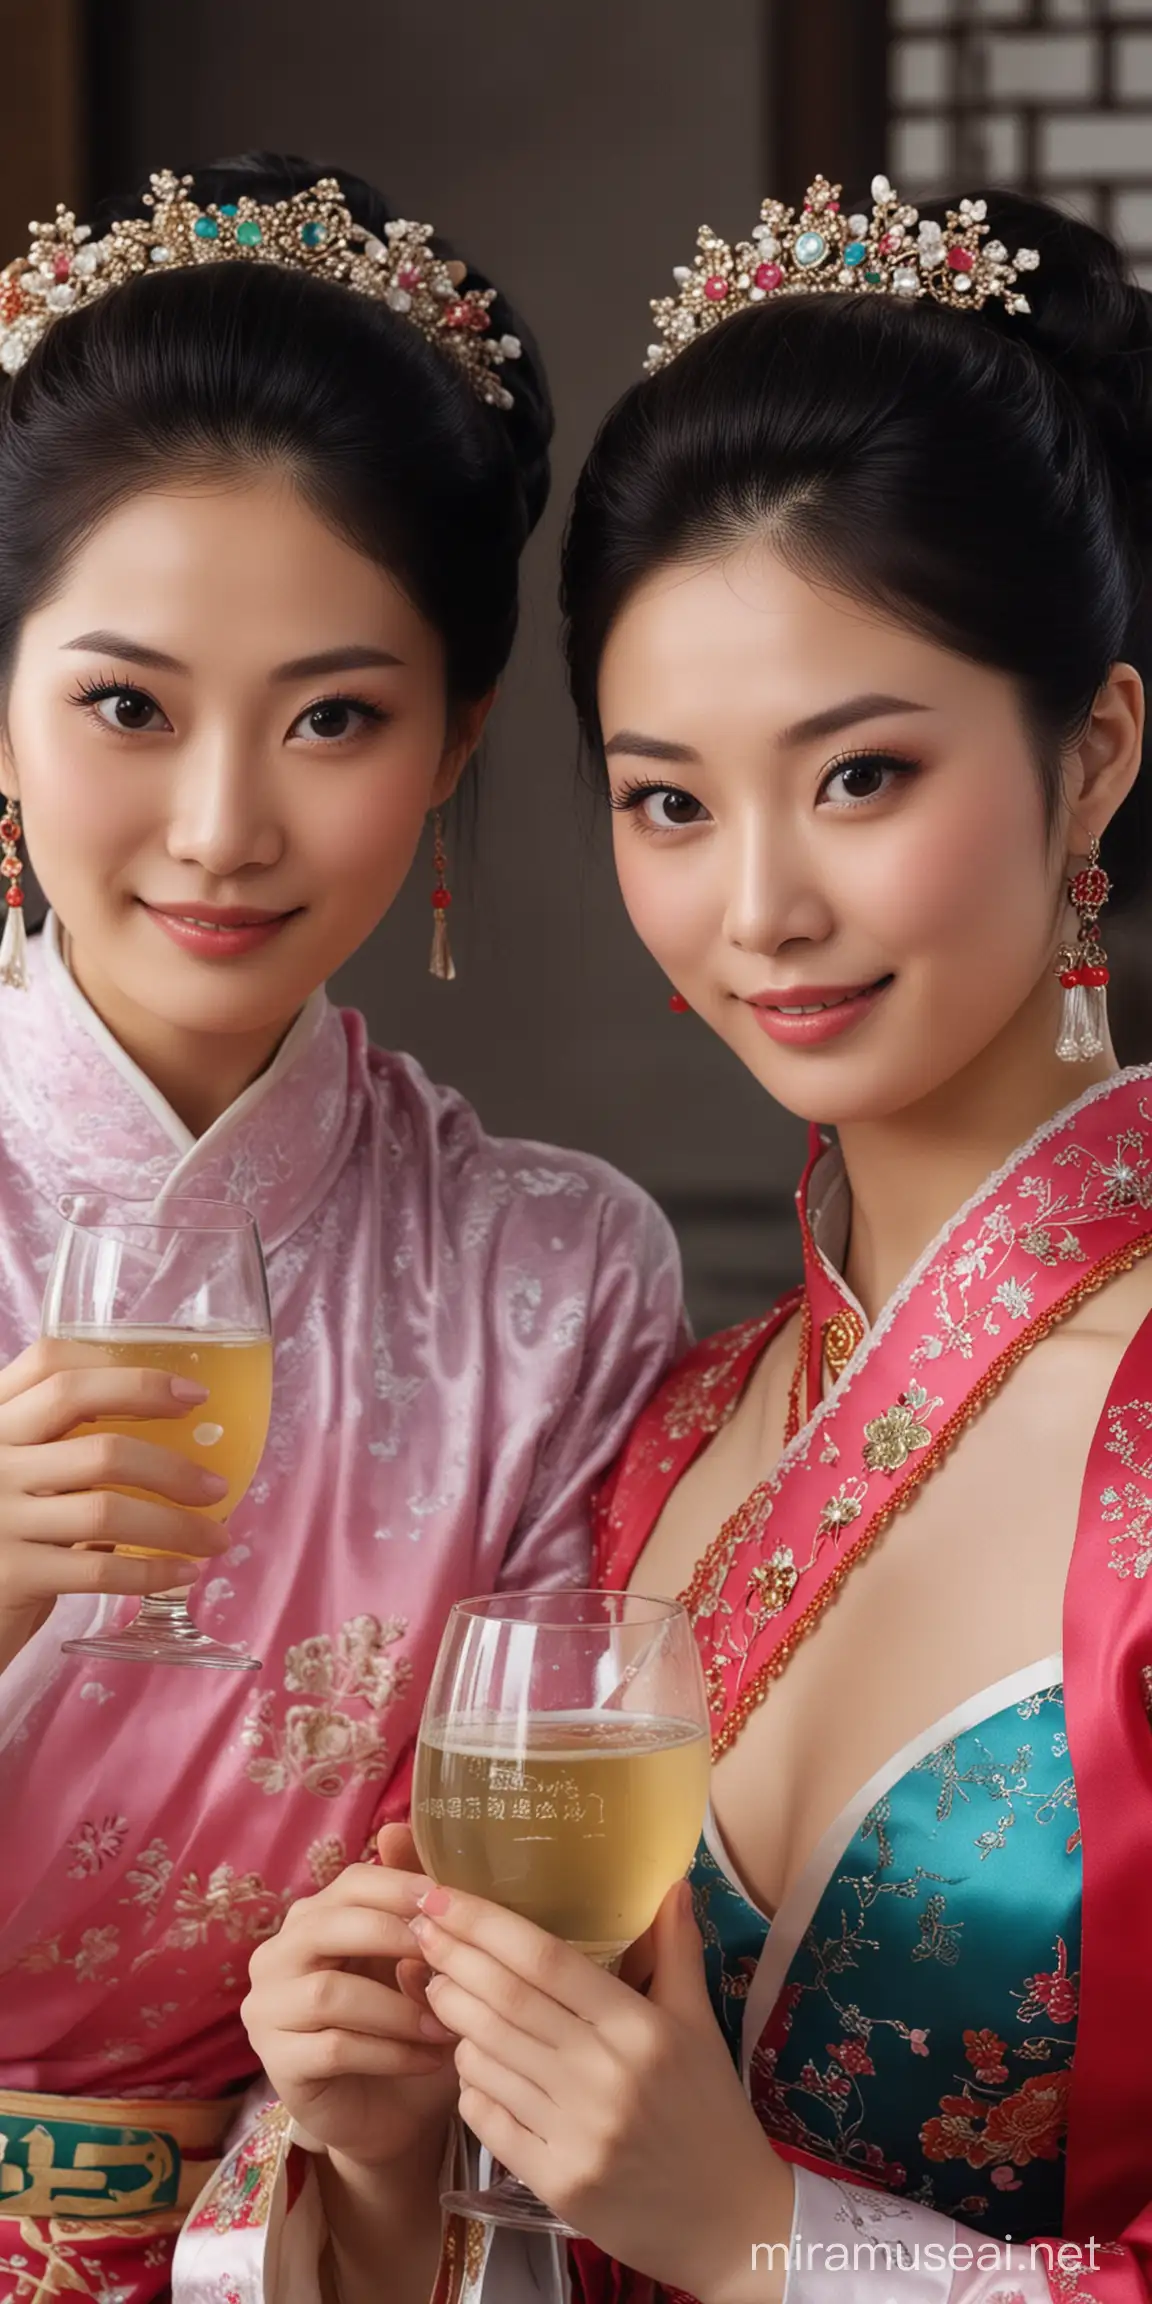 Two Young Chinese Women Enjoying a Drink Together